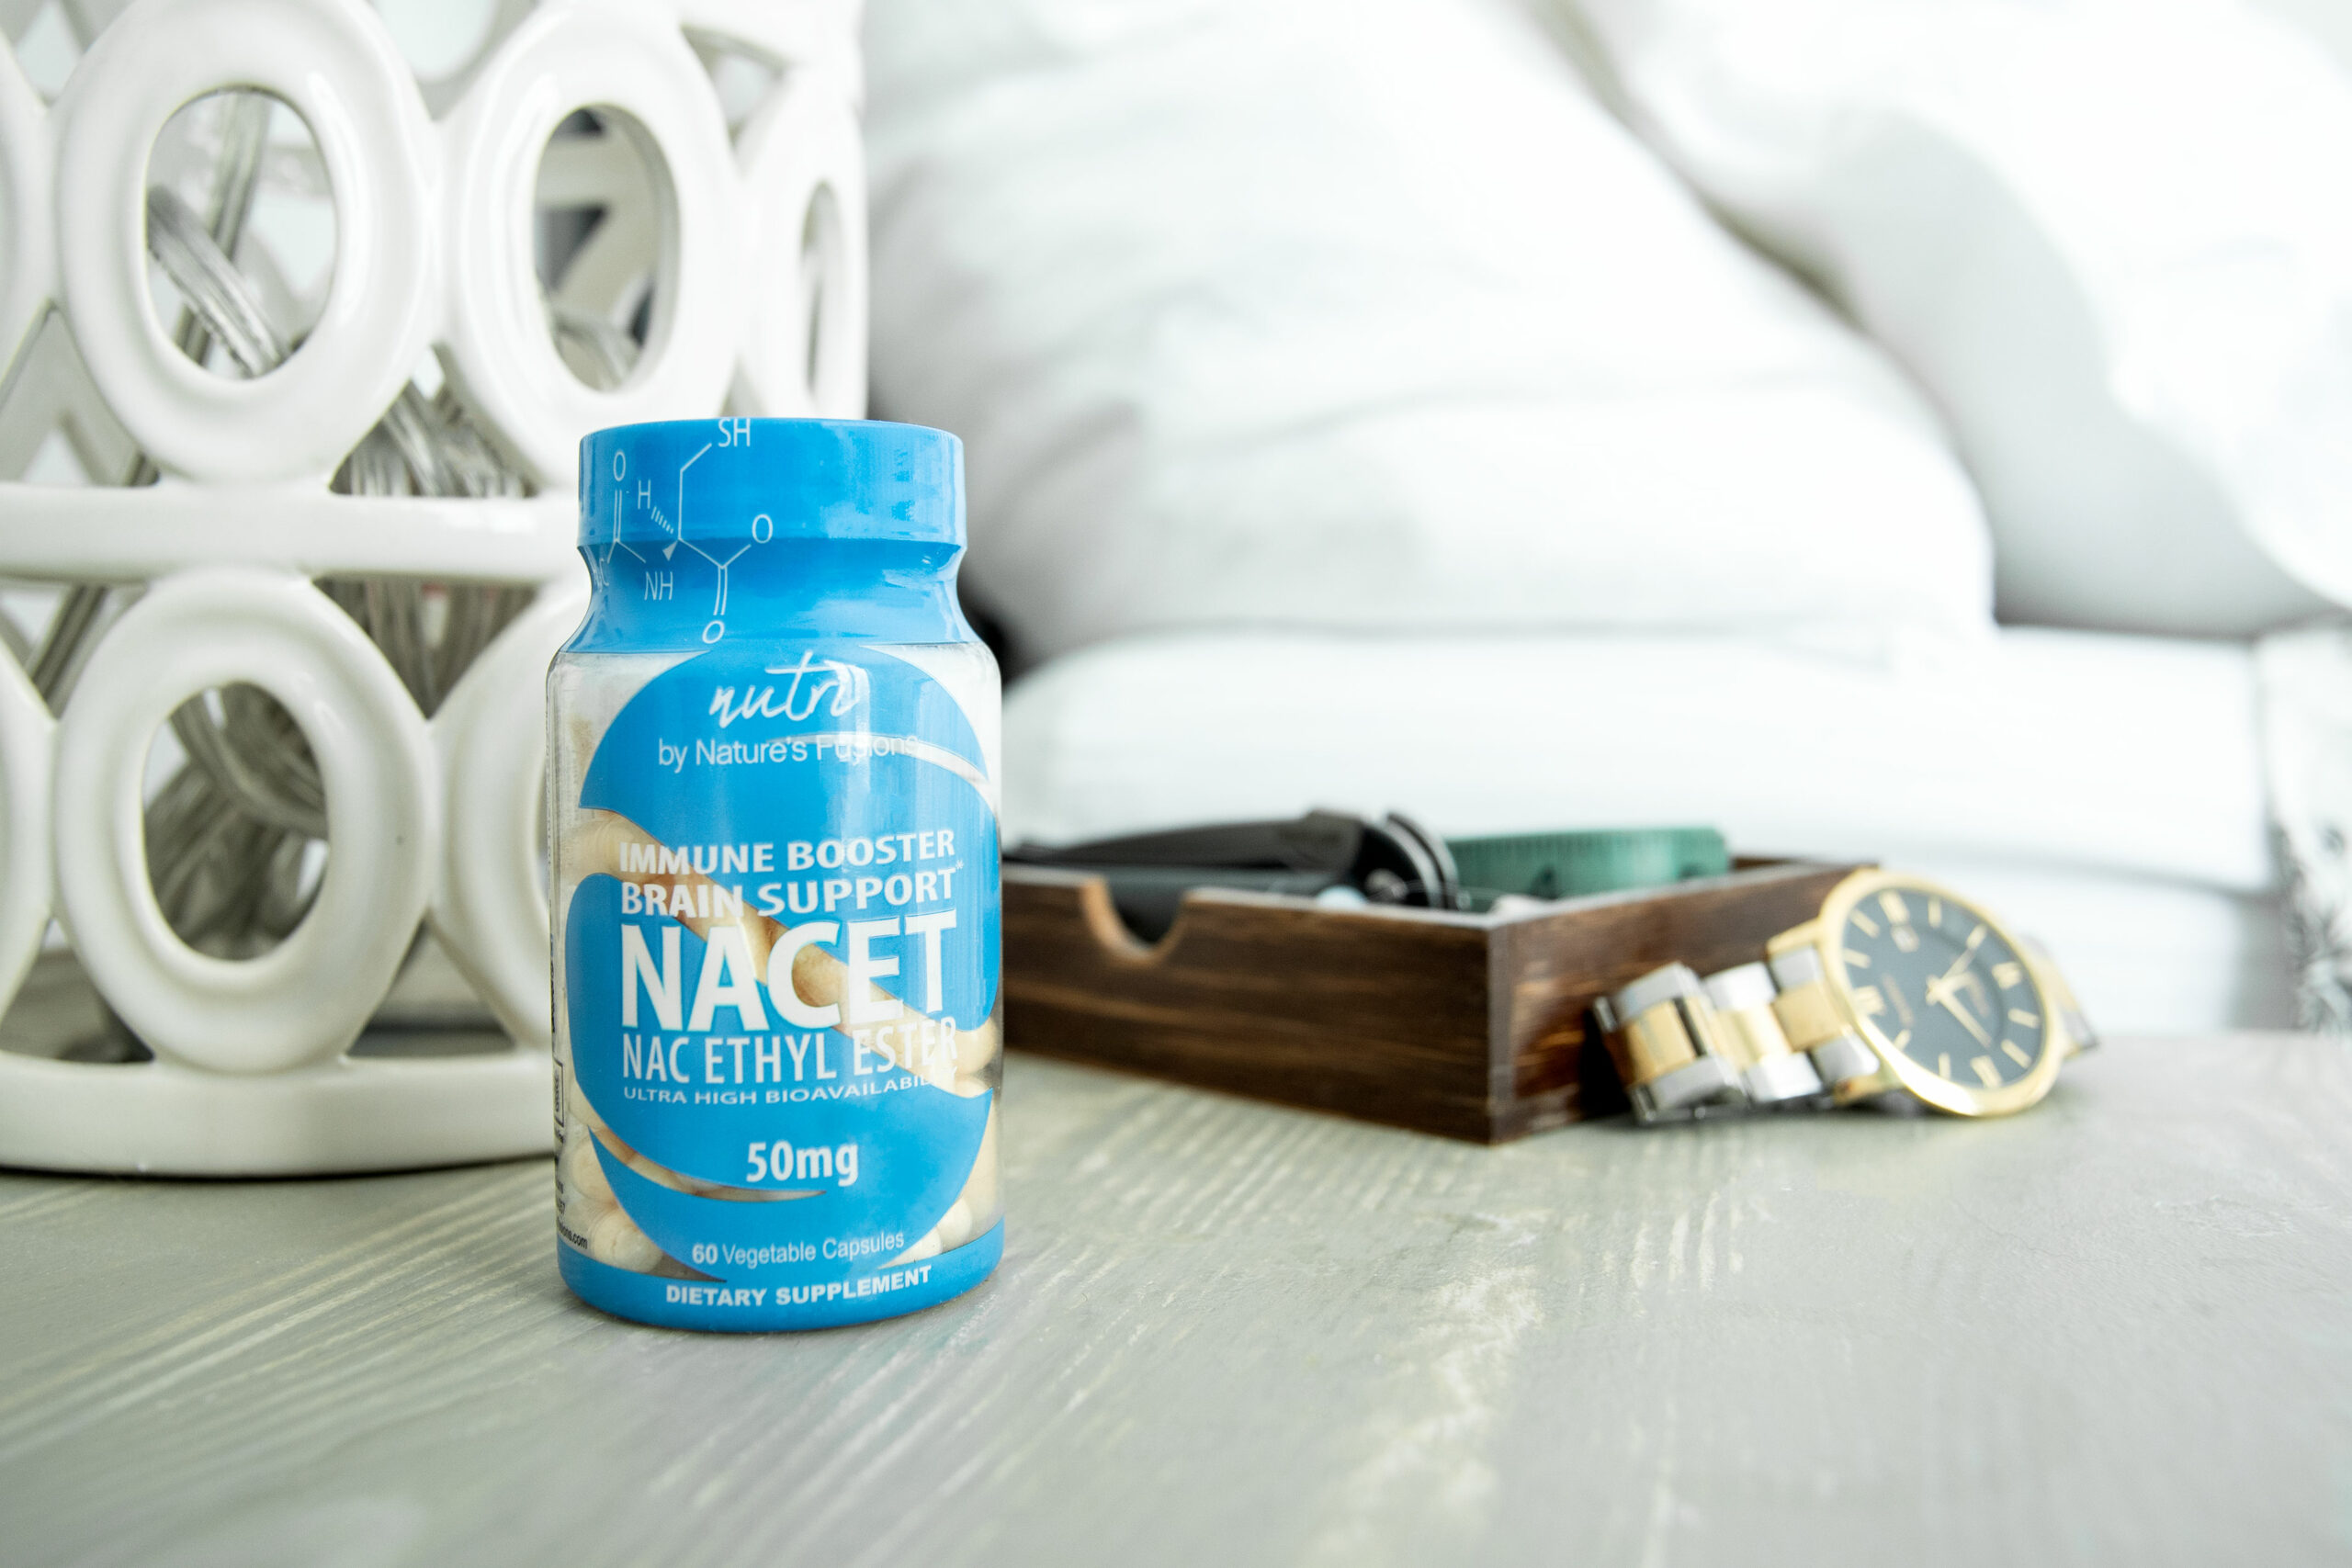 NACET – What’s With the Smell?